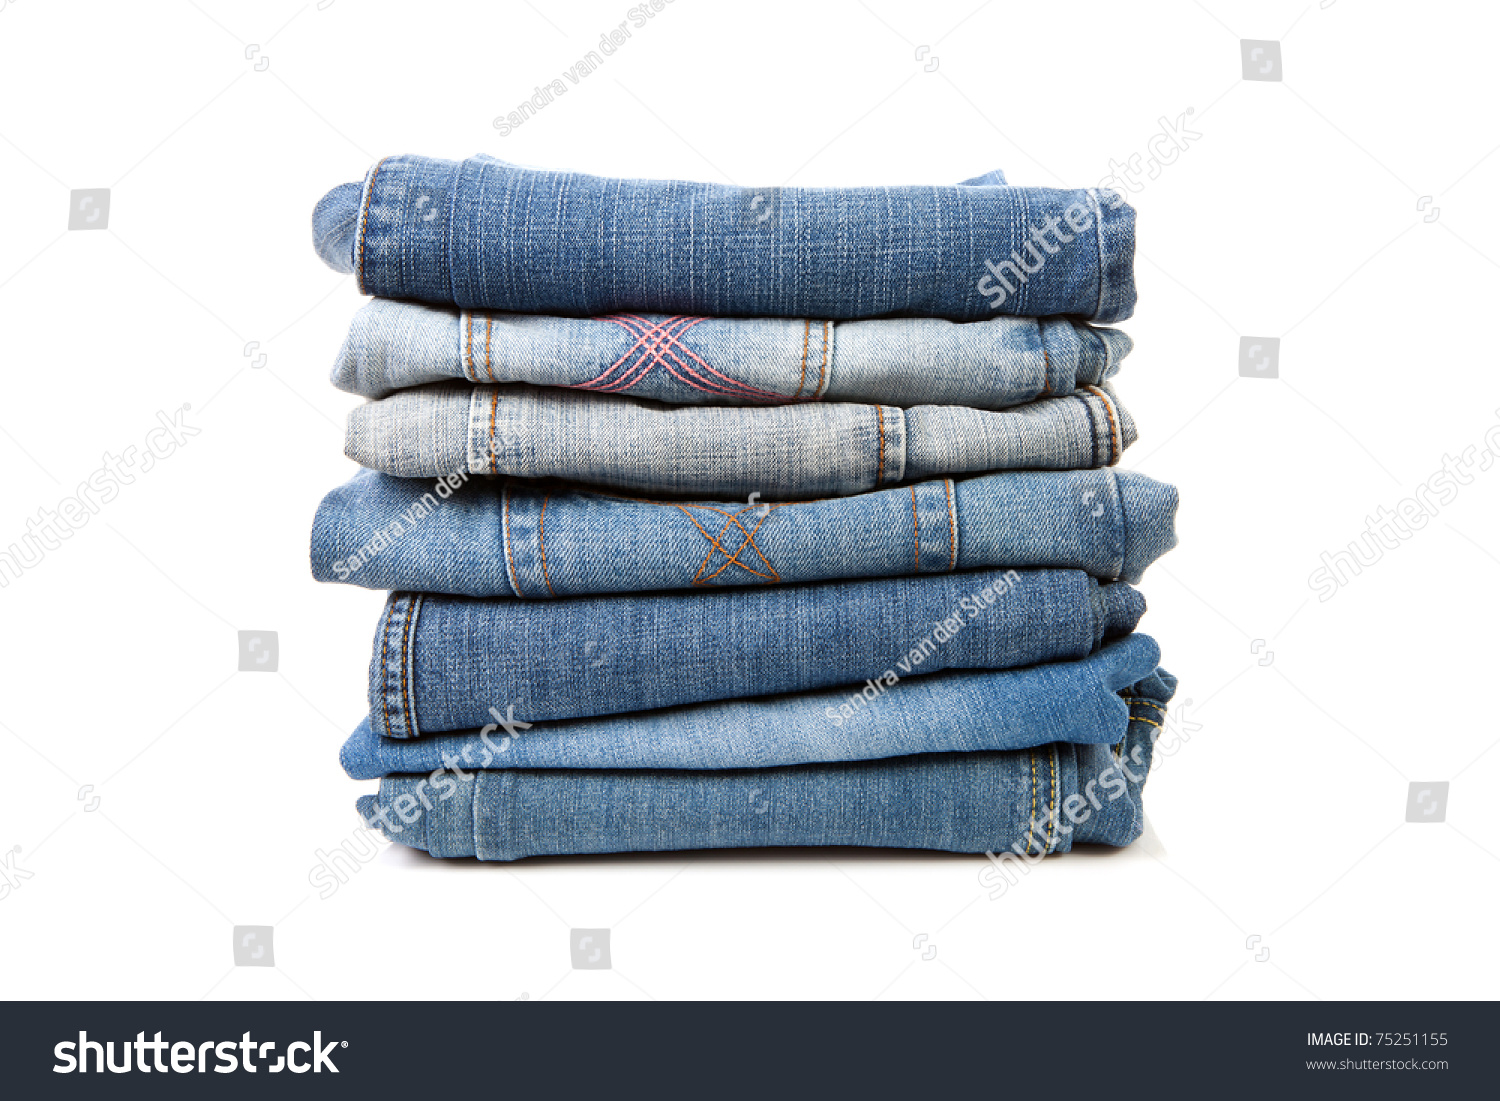 Pile Of Blue Jeans Over White Background Stock Photo 75251155 ...